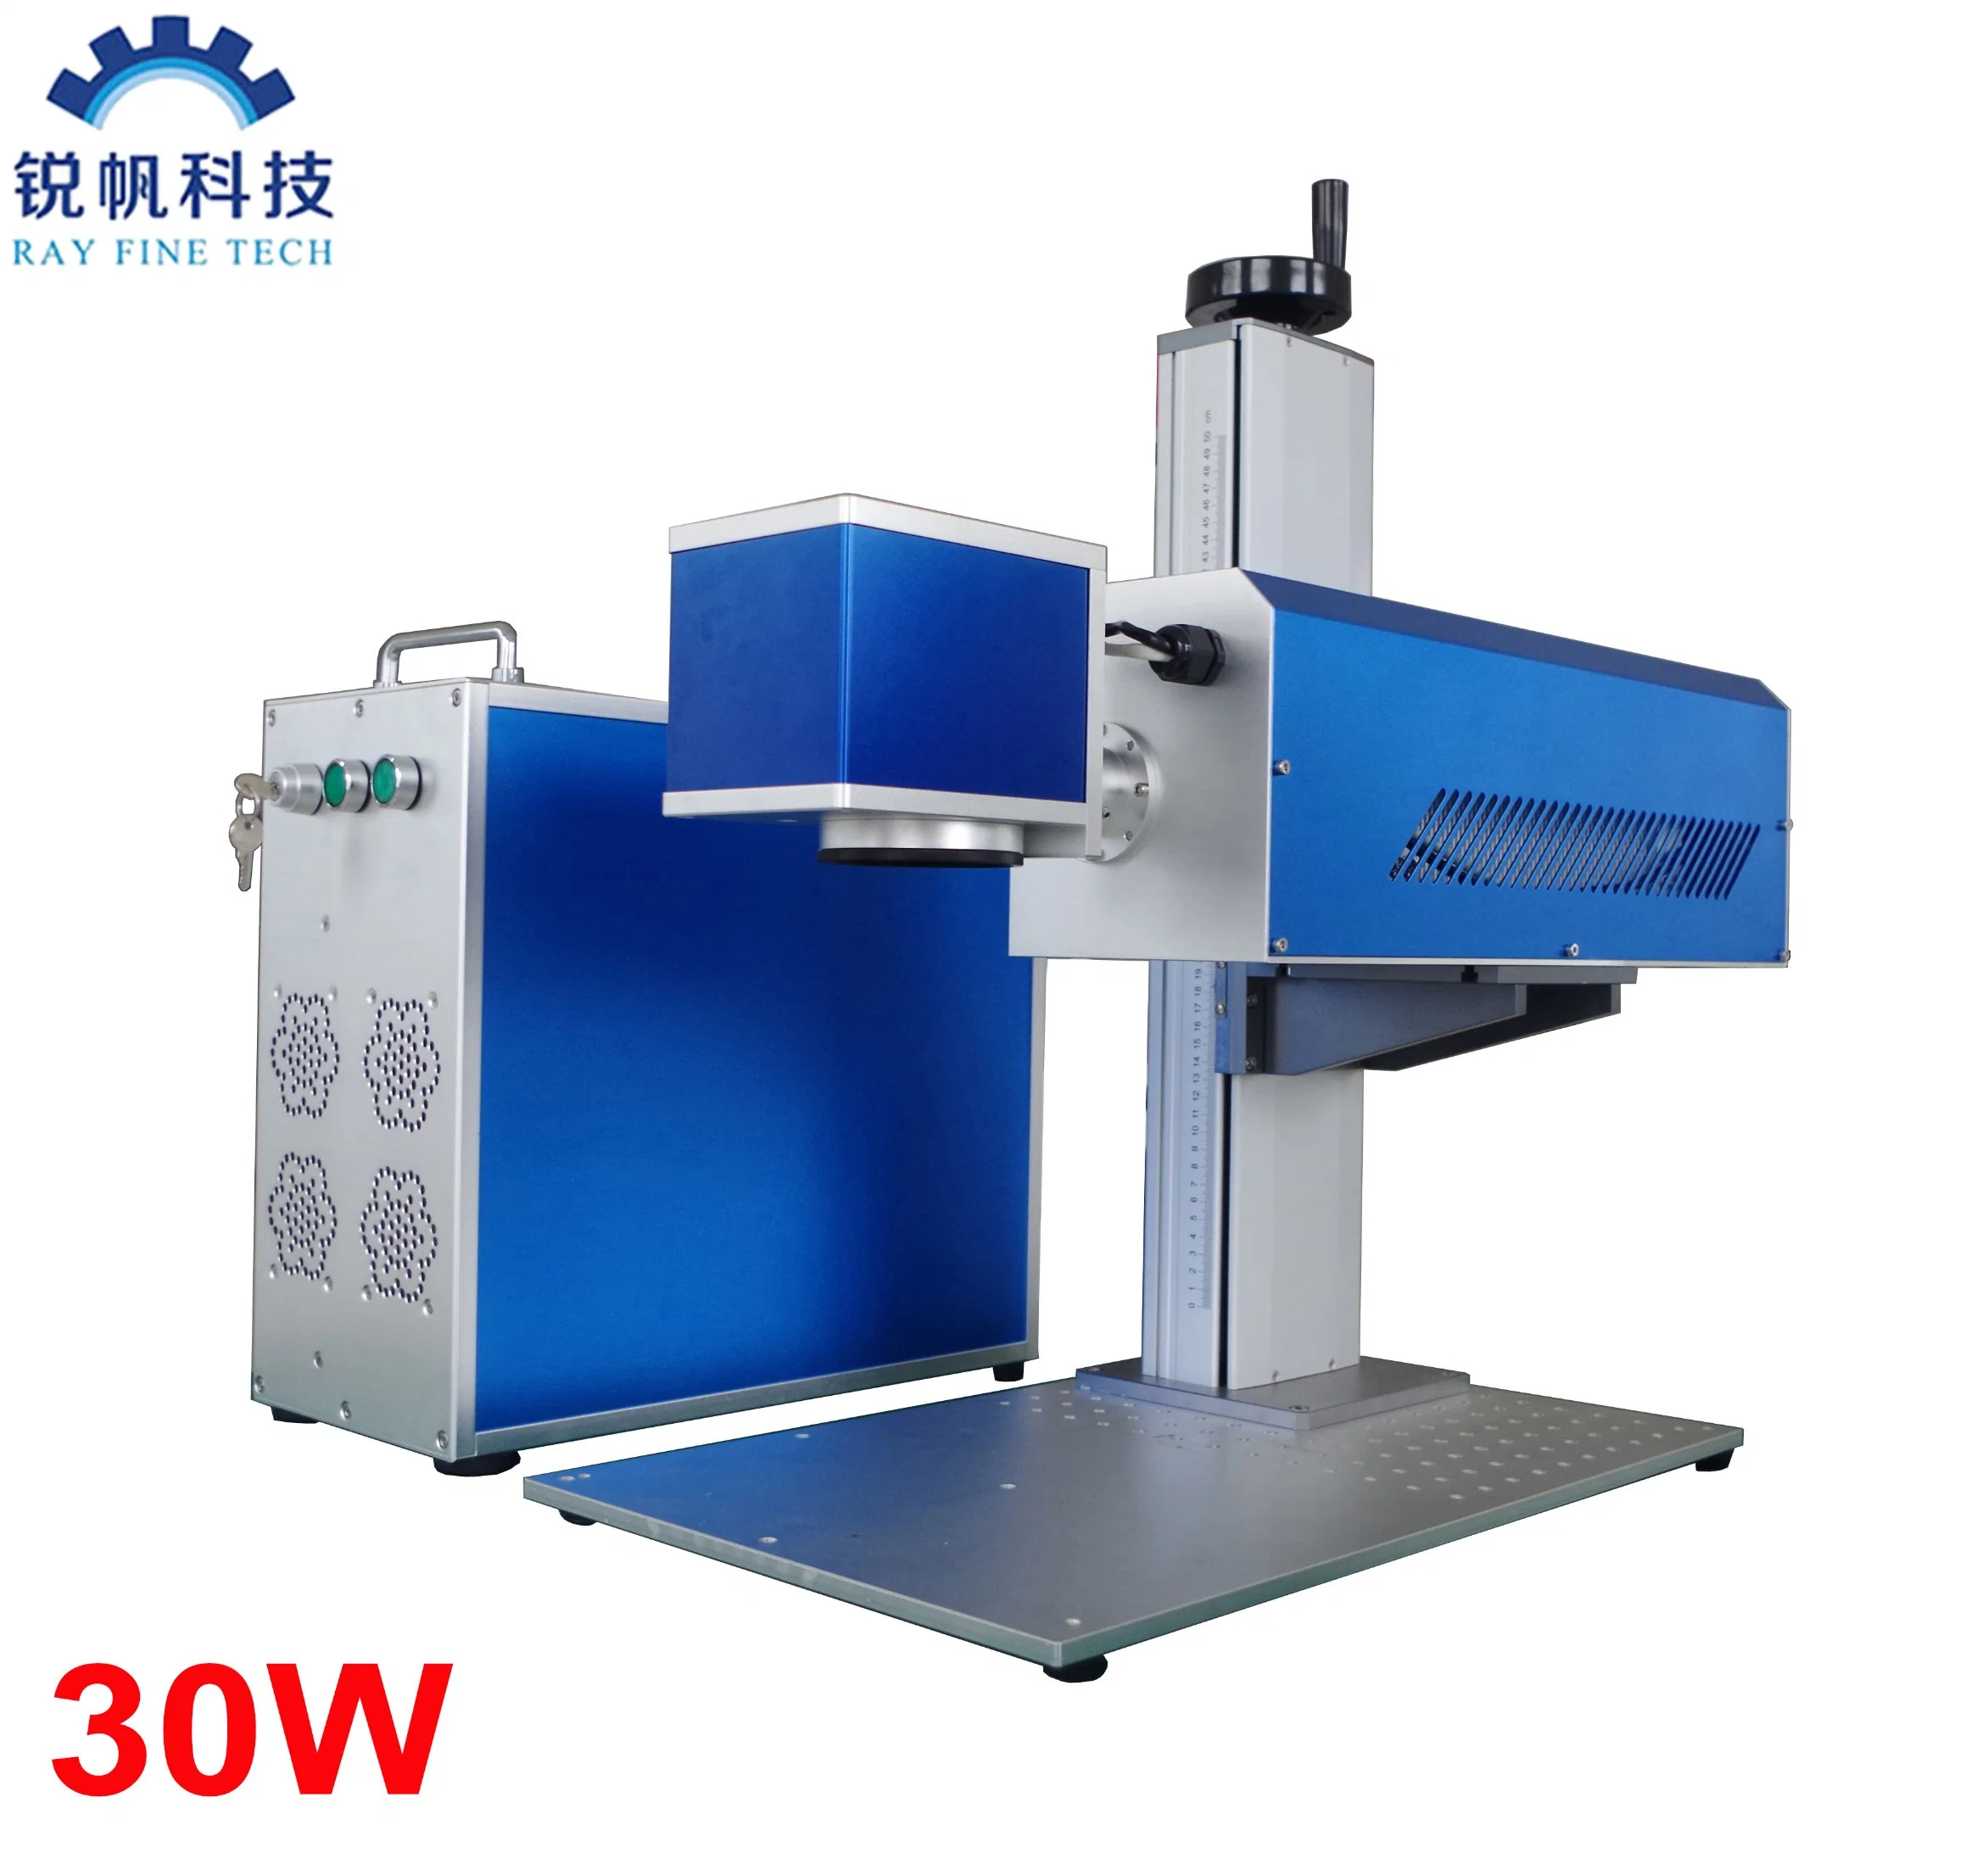 Wood Engraving Co2 Laser Marking Machine for High-Quality Results